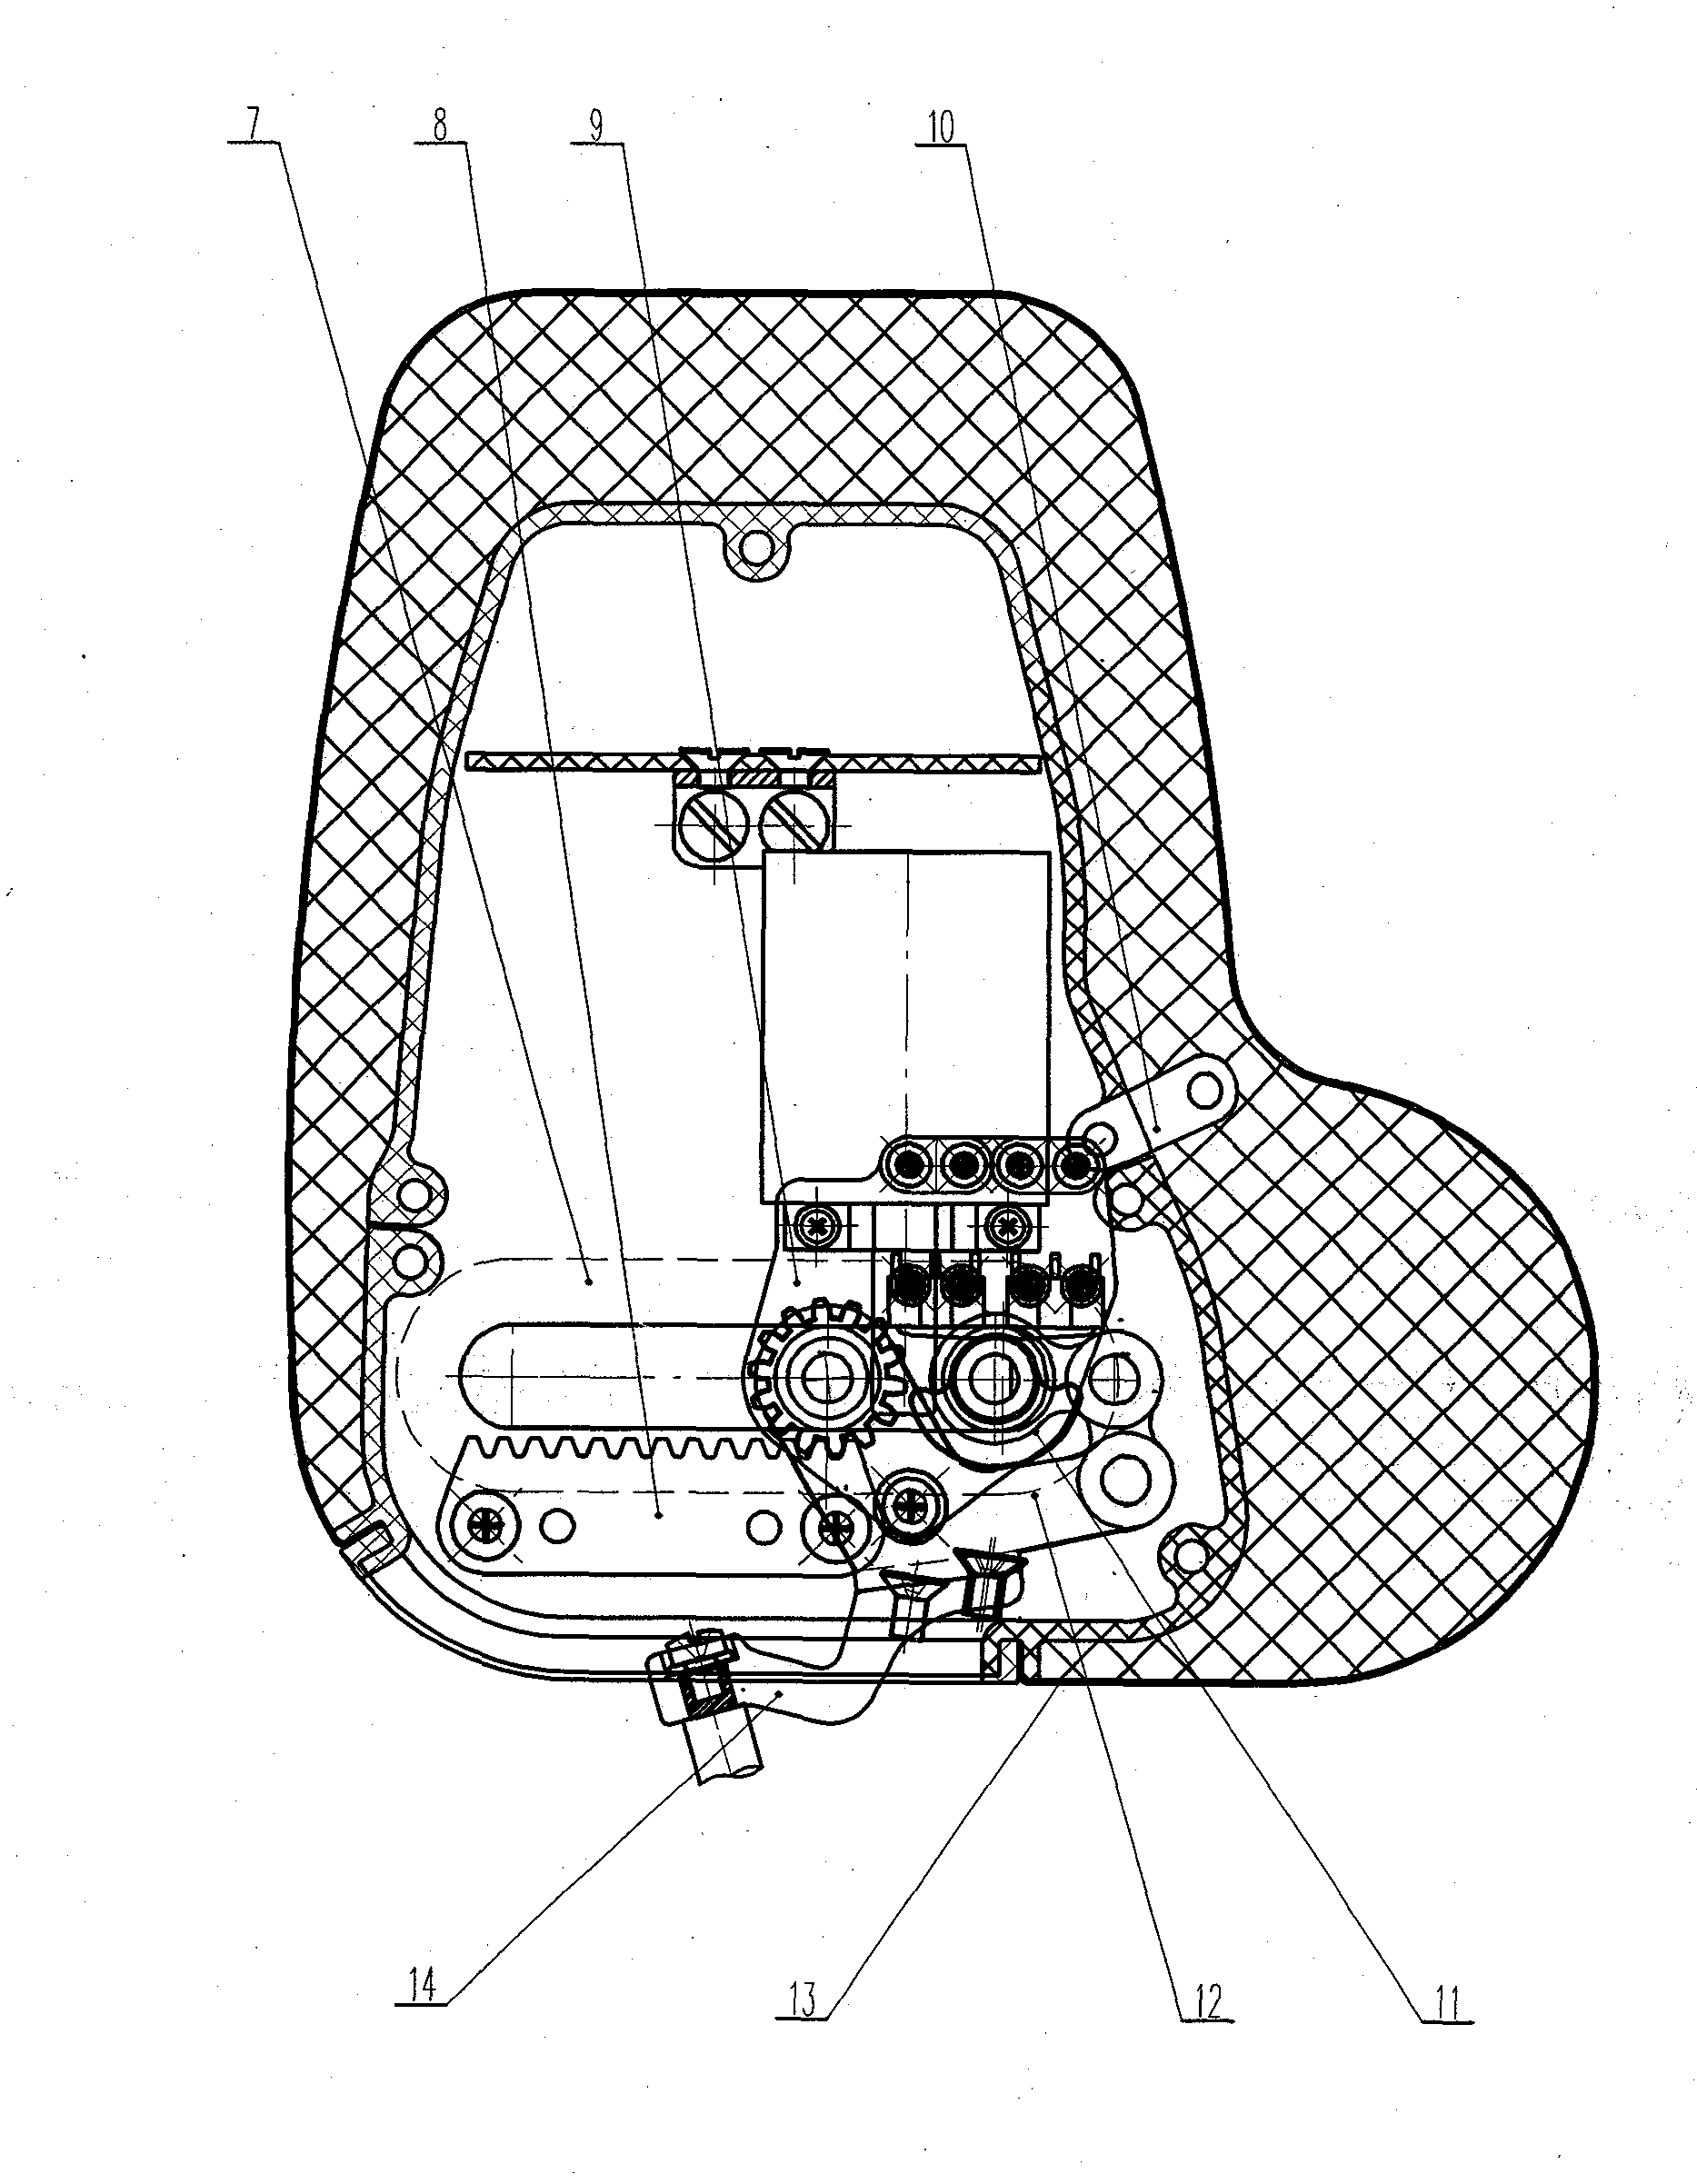 Headrest for vehicle seat and sofa backrest capable of automatically regulating angle and front and back positions